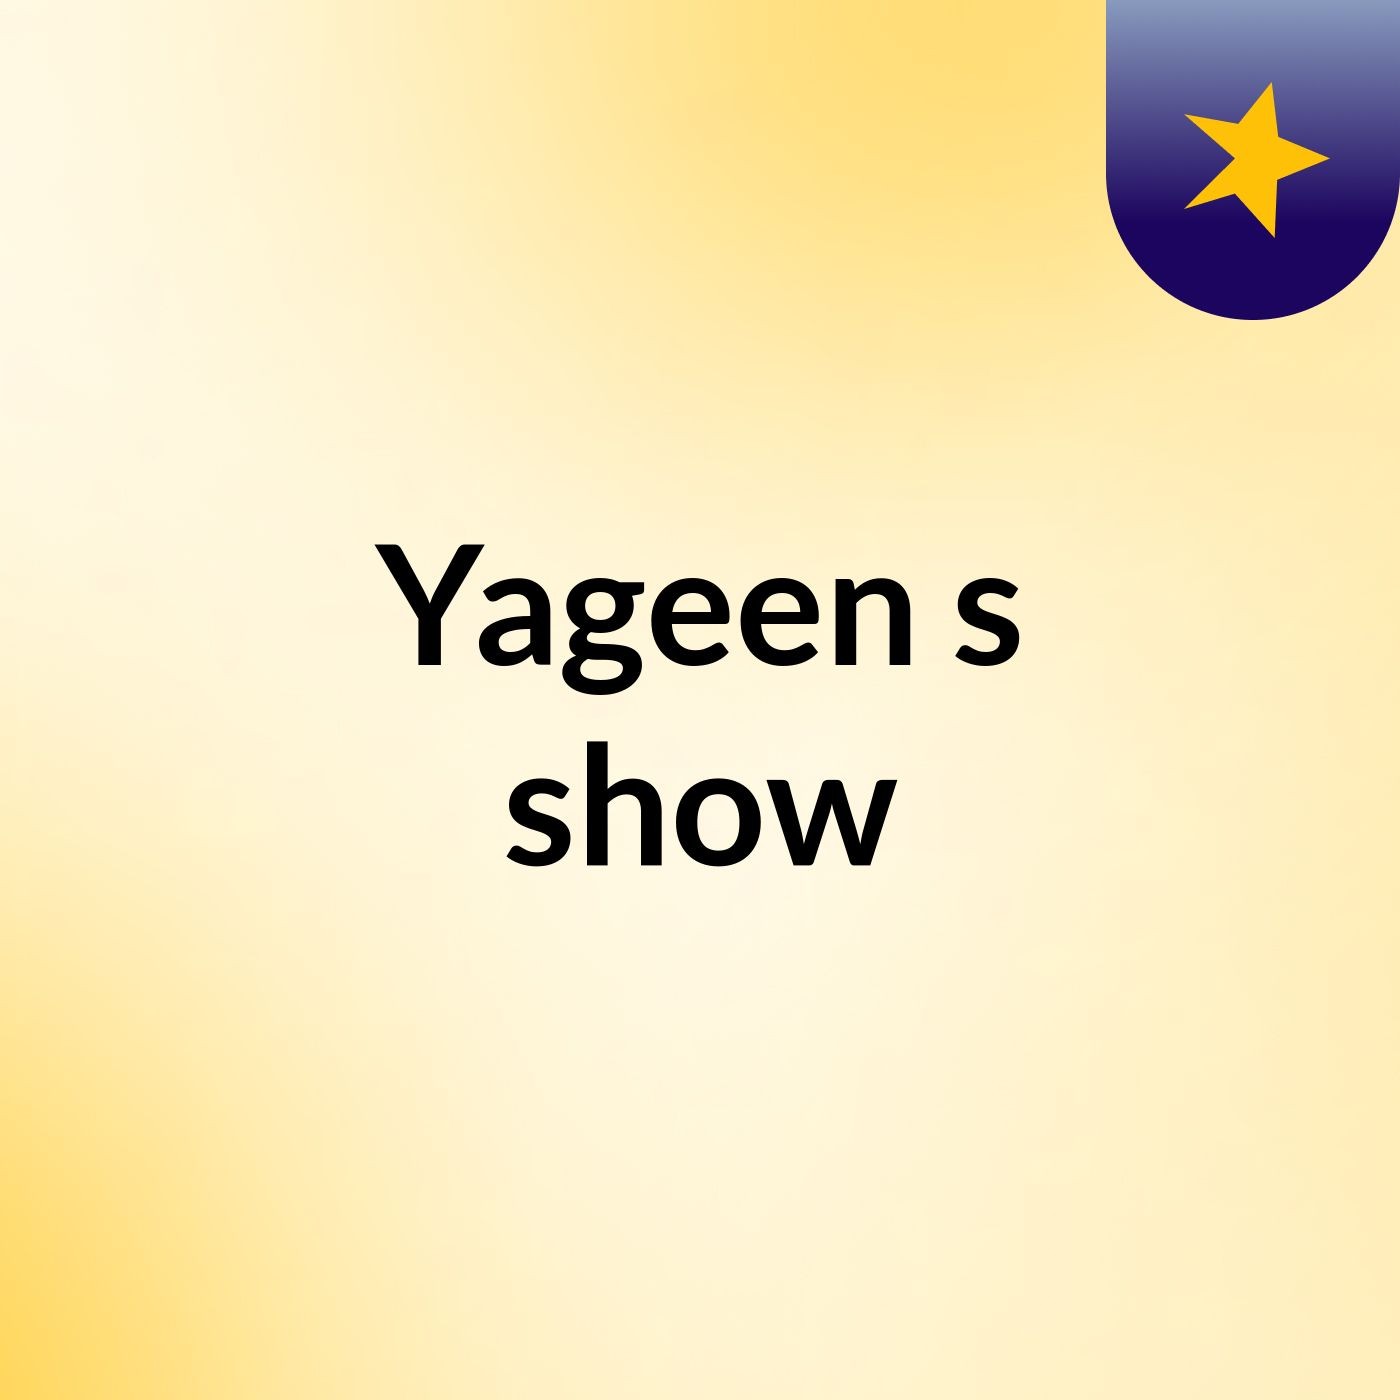 Yageen's show